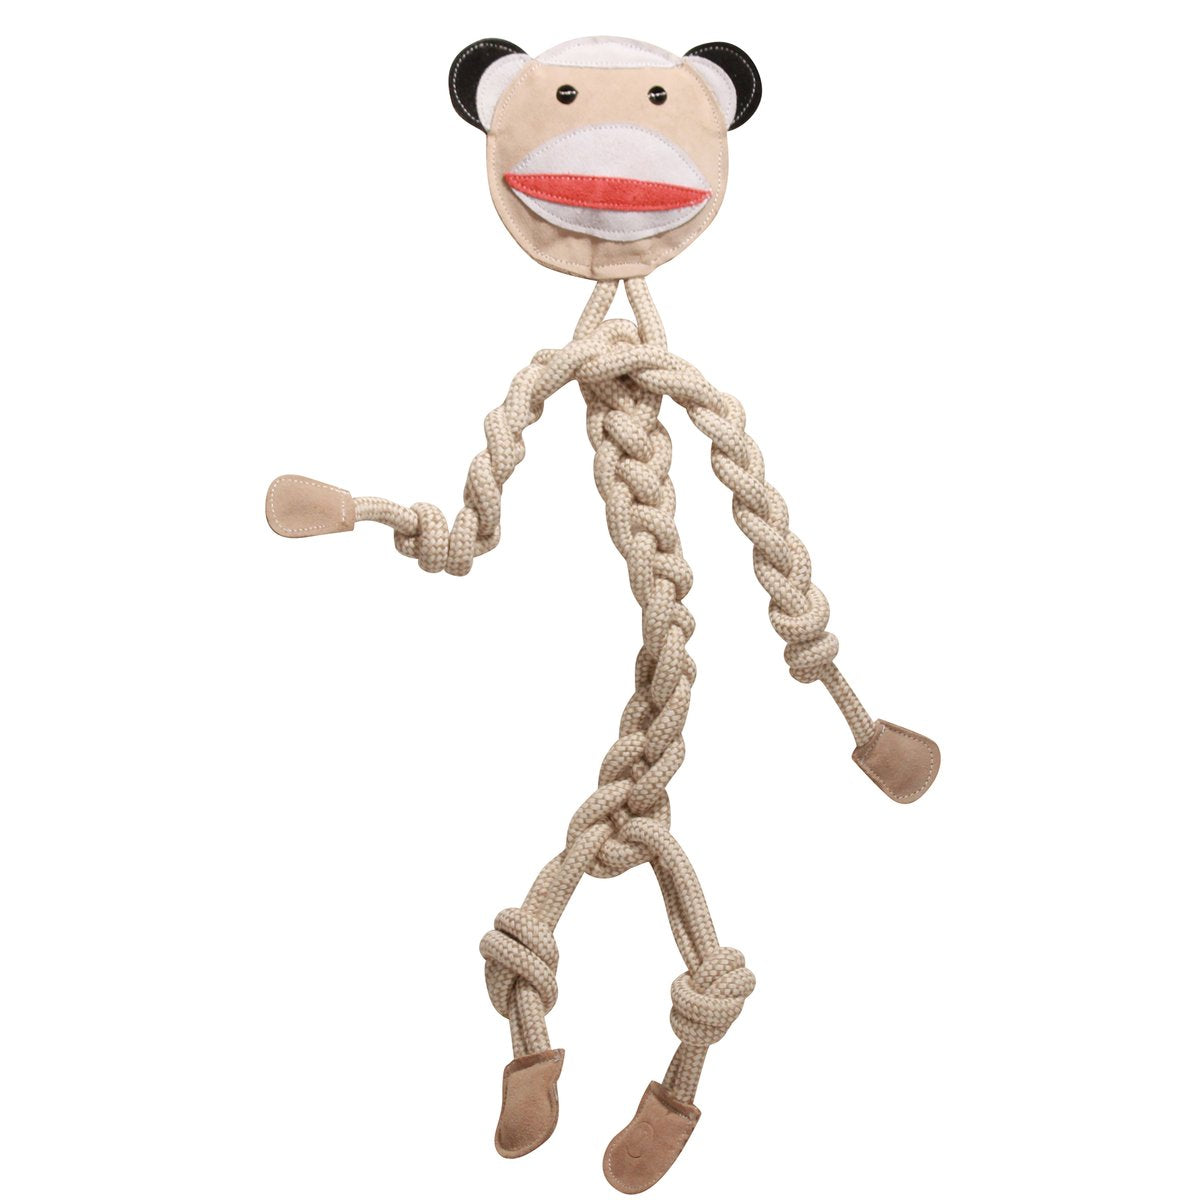 HuggleHounds HuggleHide Durable All Natural Leather & Rope Dog Toy, Sock Monkey